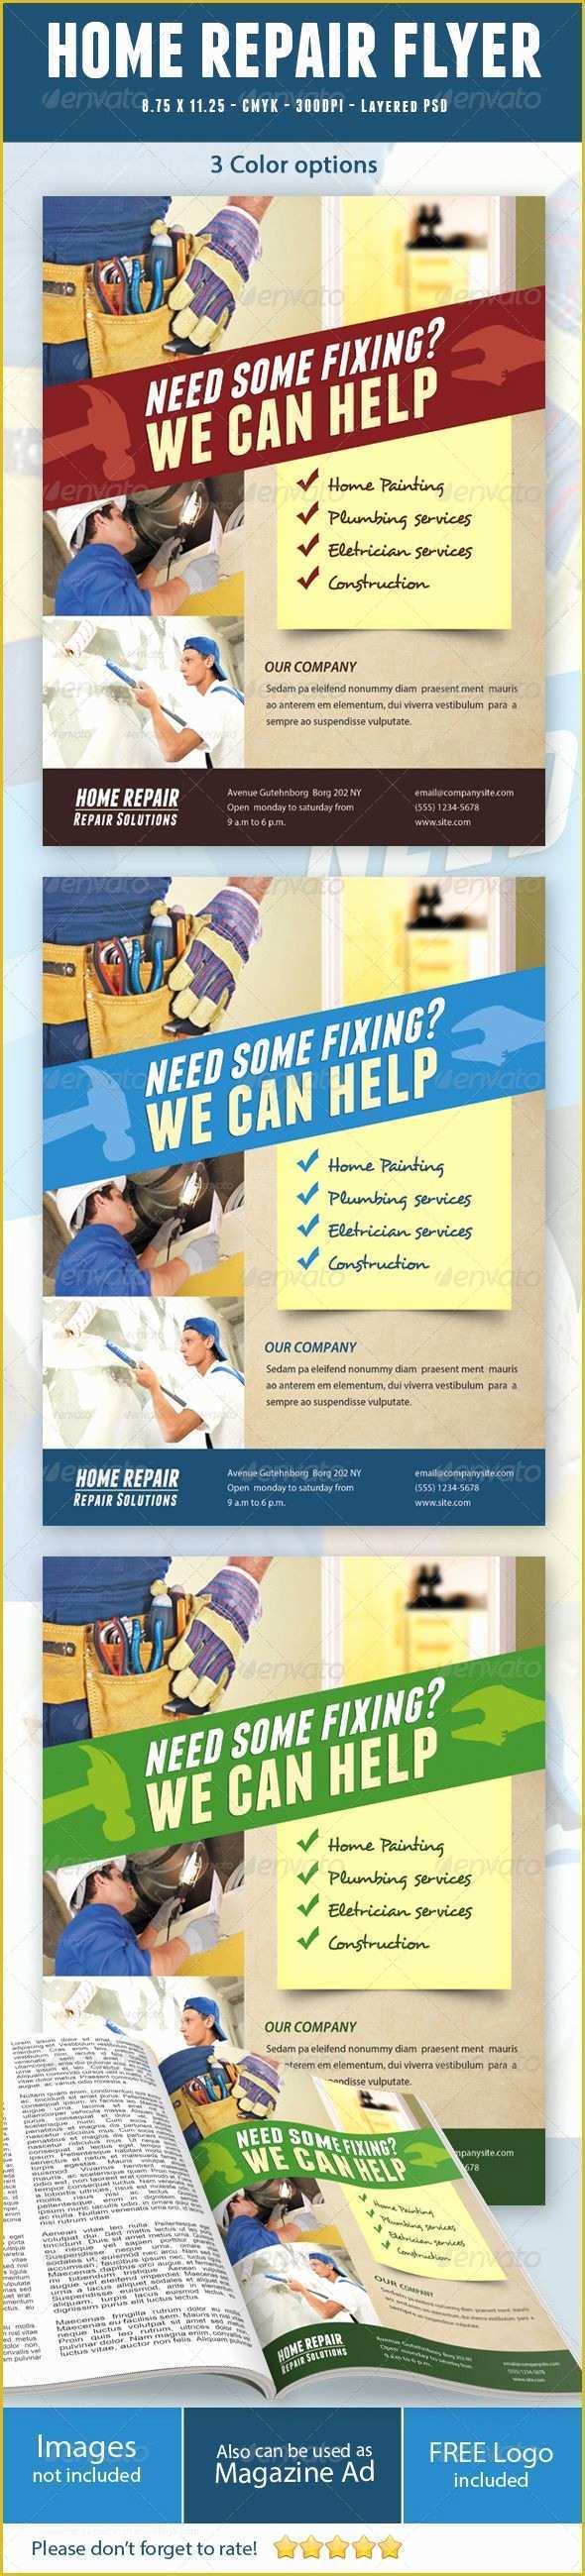 Home Improvement Flyer Template Free Of Home Repair Flyer Graphicriver Home Repair Flyer This